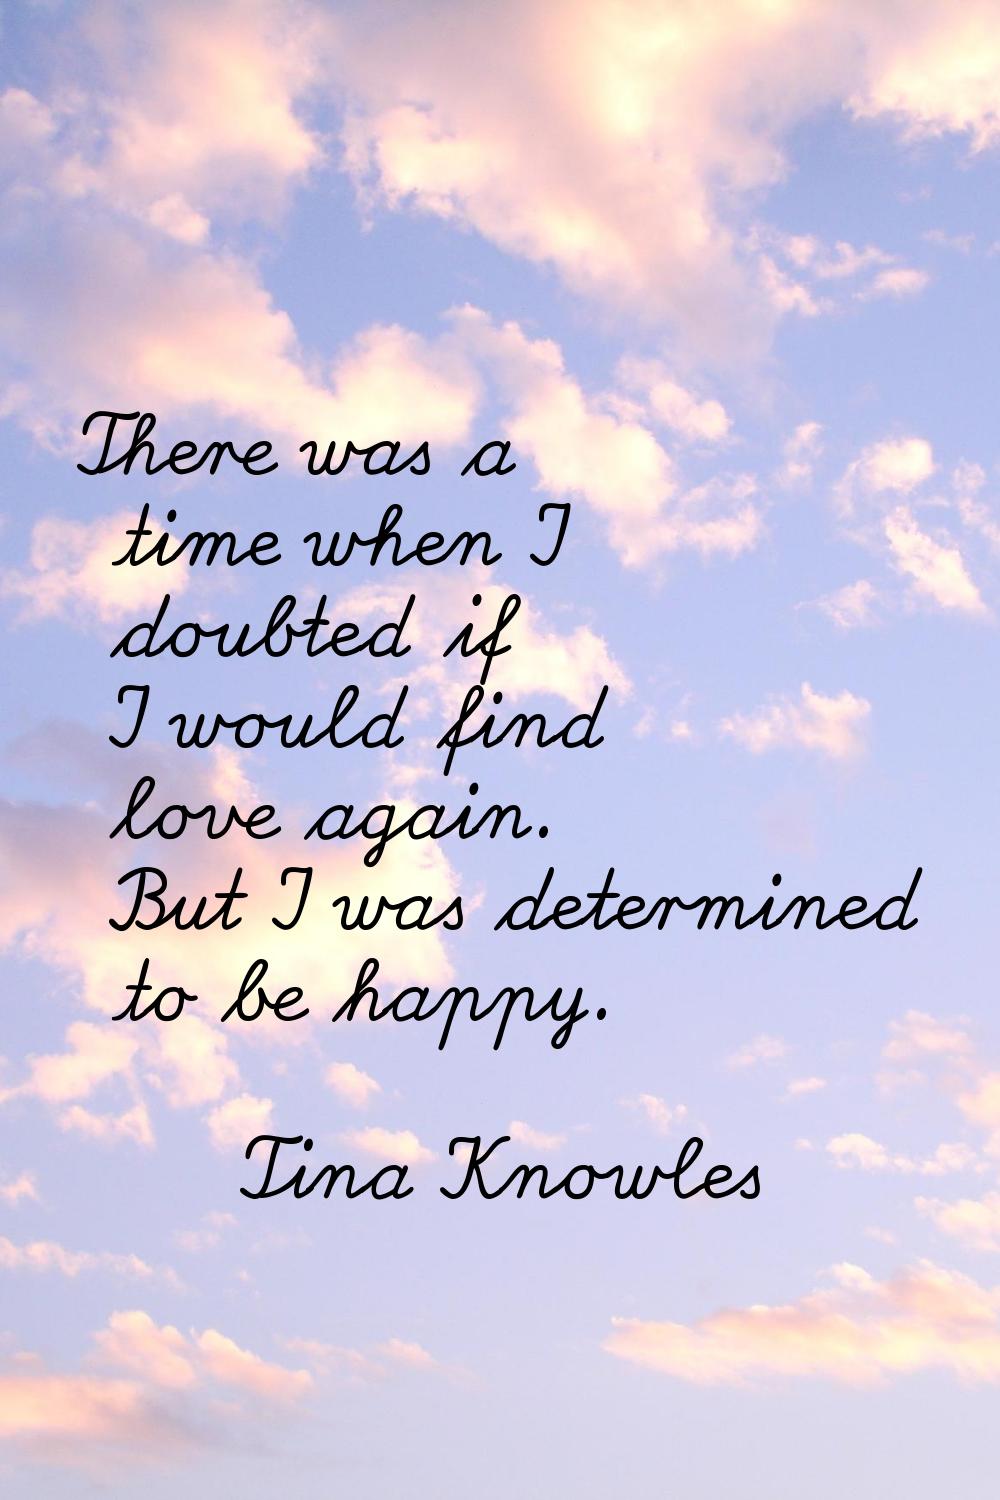 There was a time when I doubted if I would find love again. But I was determined to be happy.